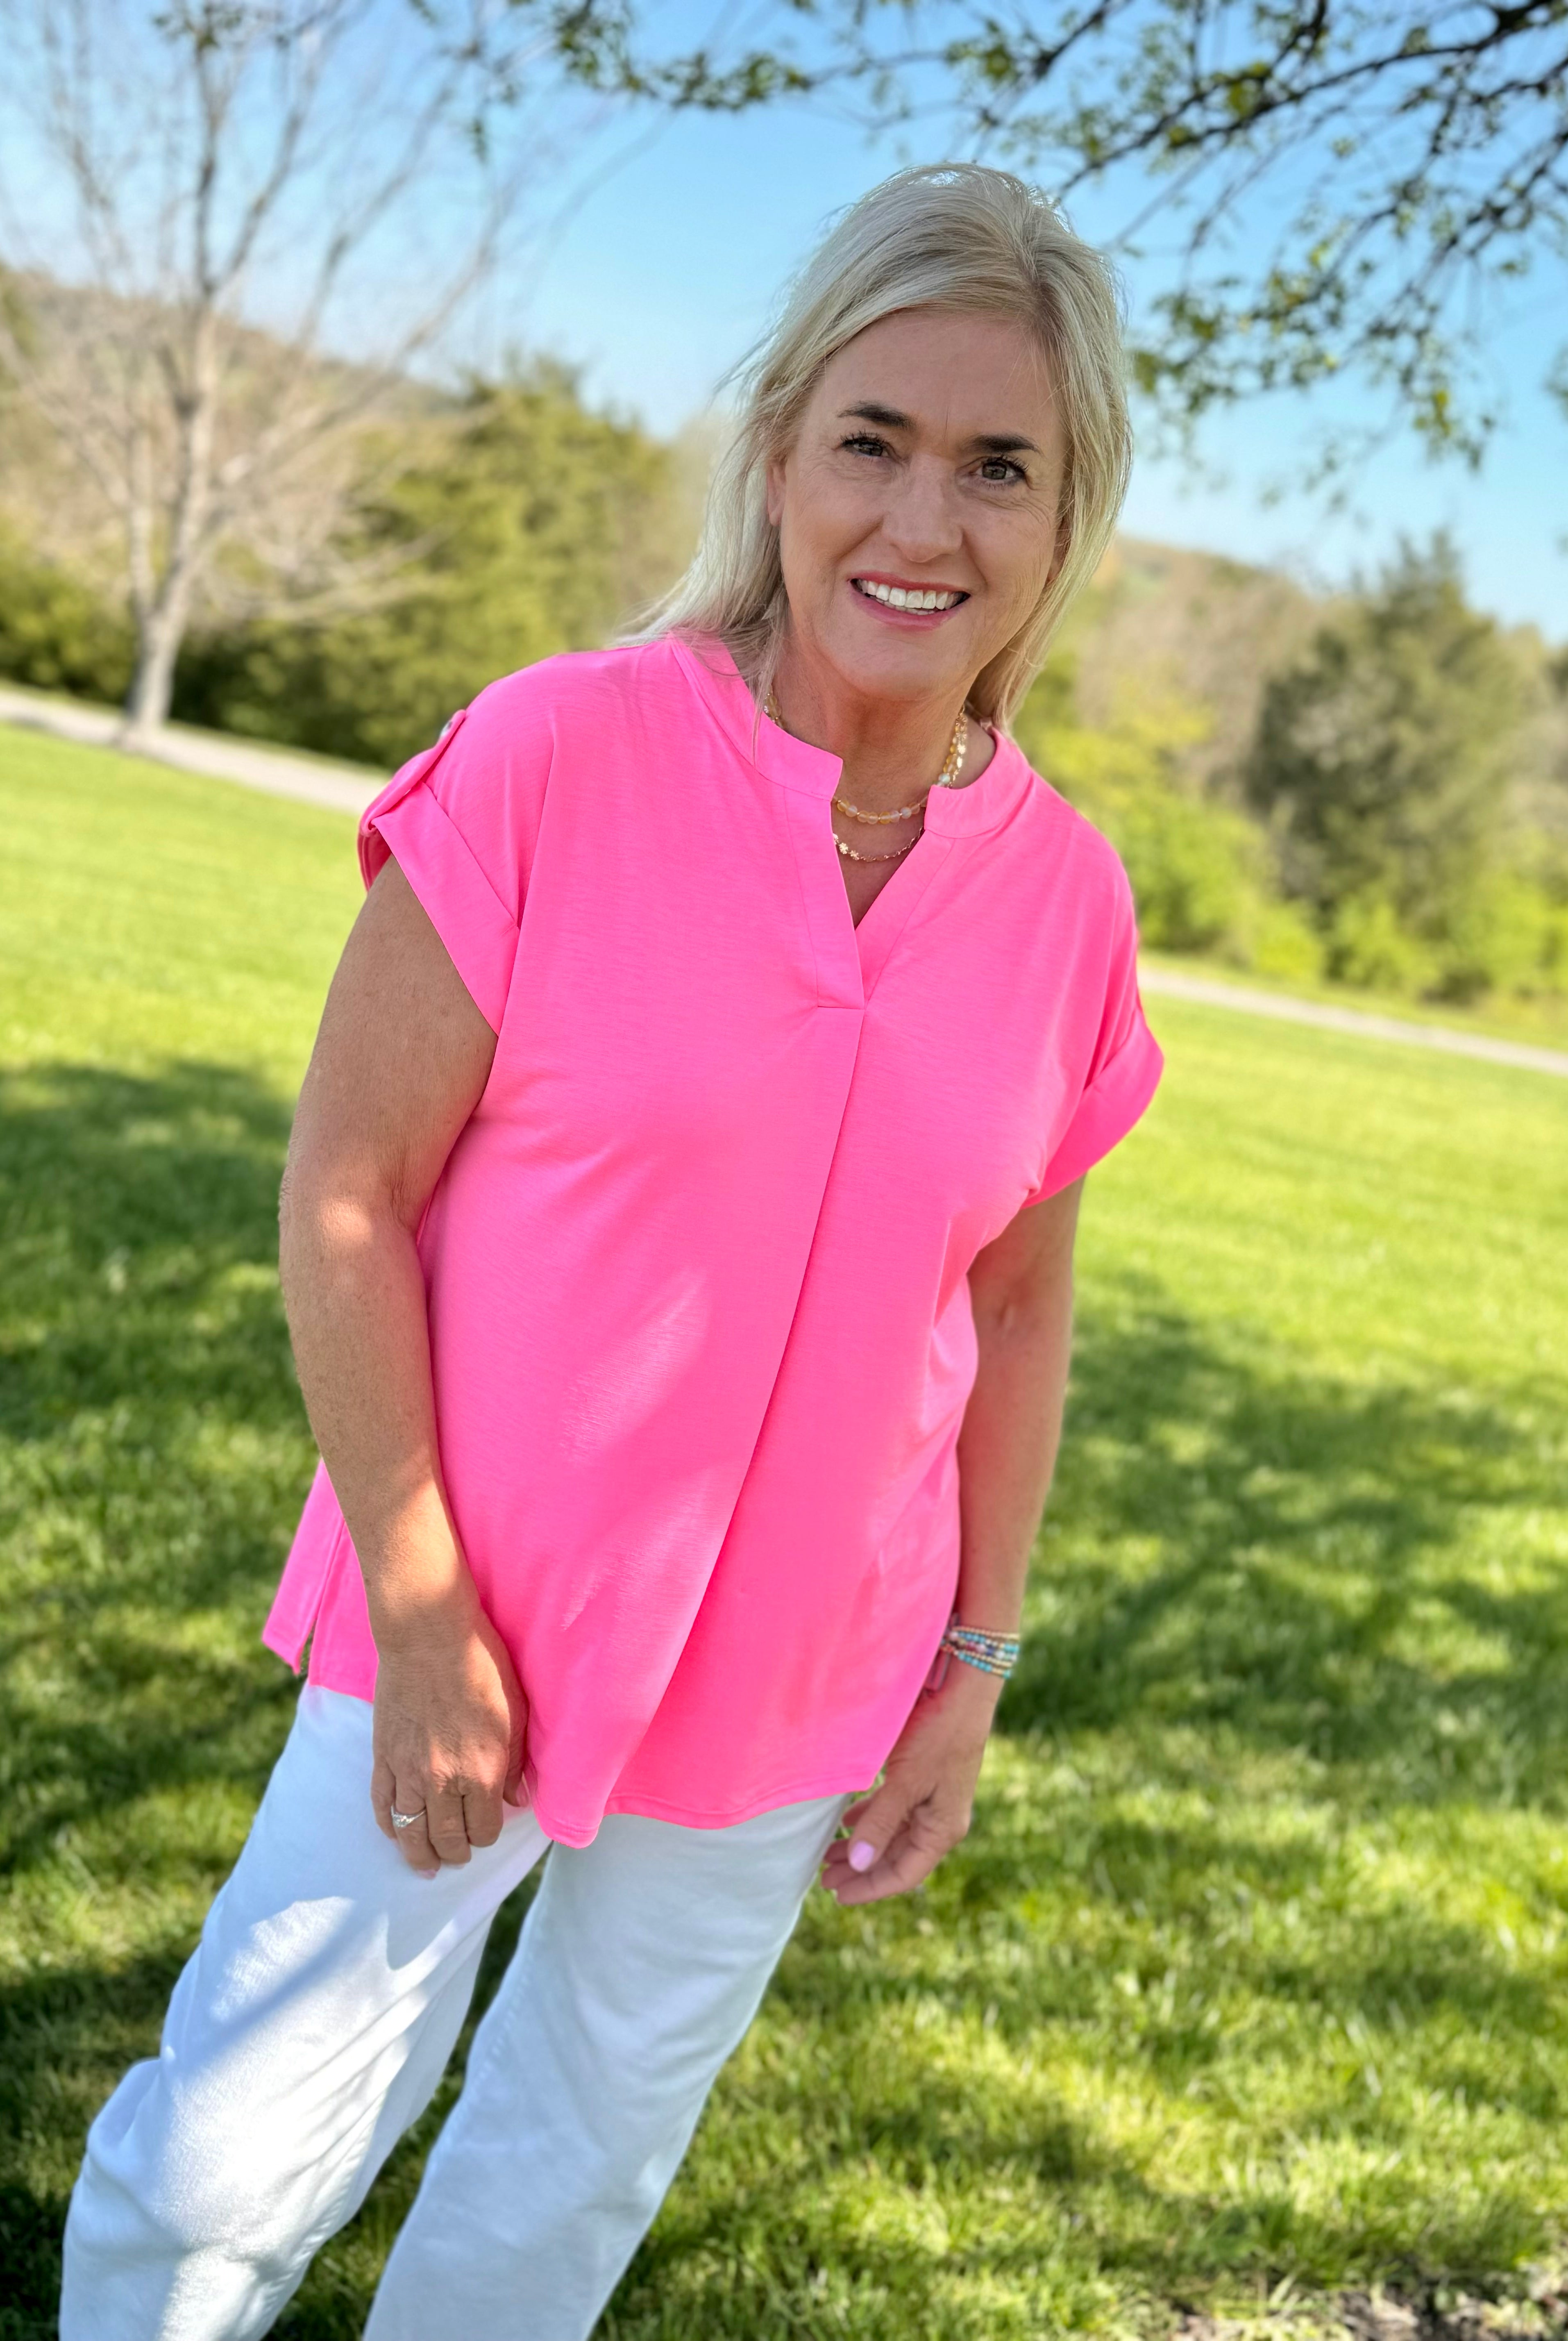 Bright & Beautiful Short Sleeve Top - Bubblegum Pink-Tops-The Lovely Closet-The Lovely Closet, Women's Fashion Boutique in Alexandria, KY